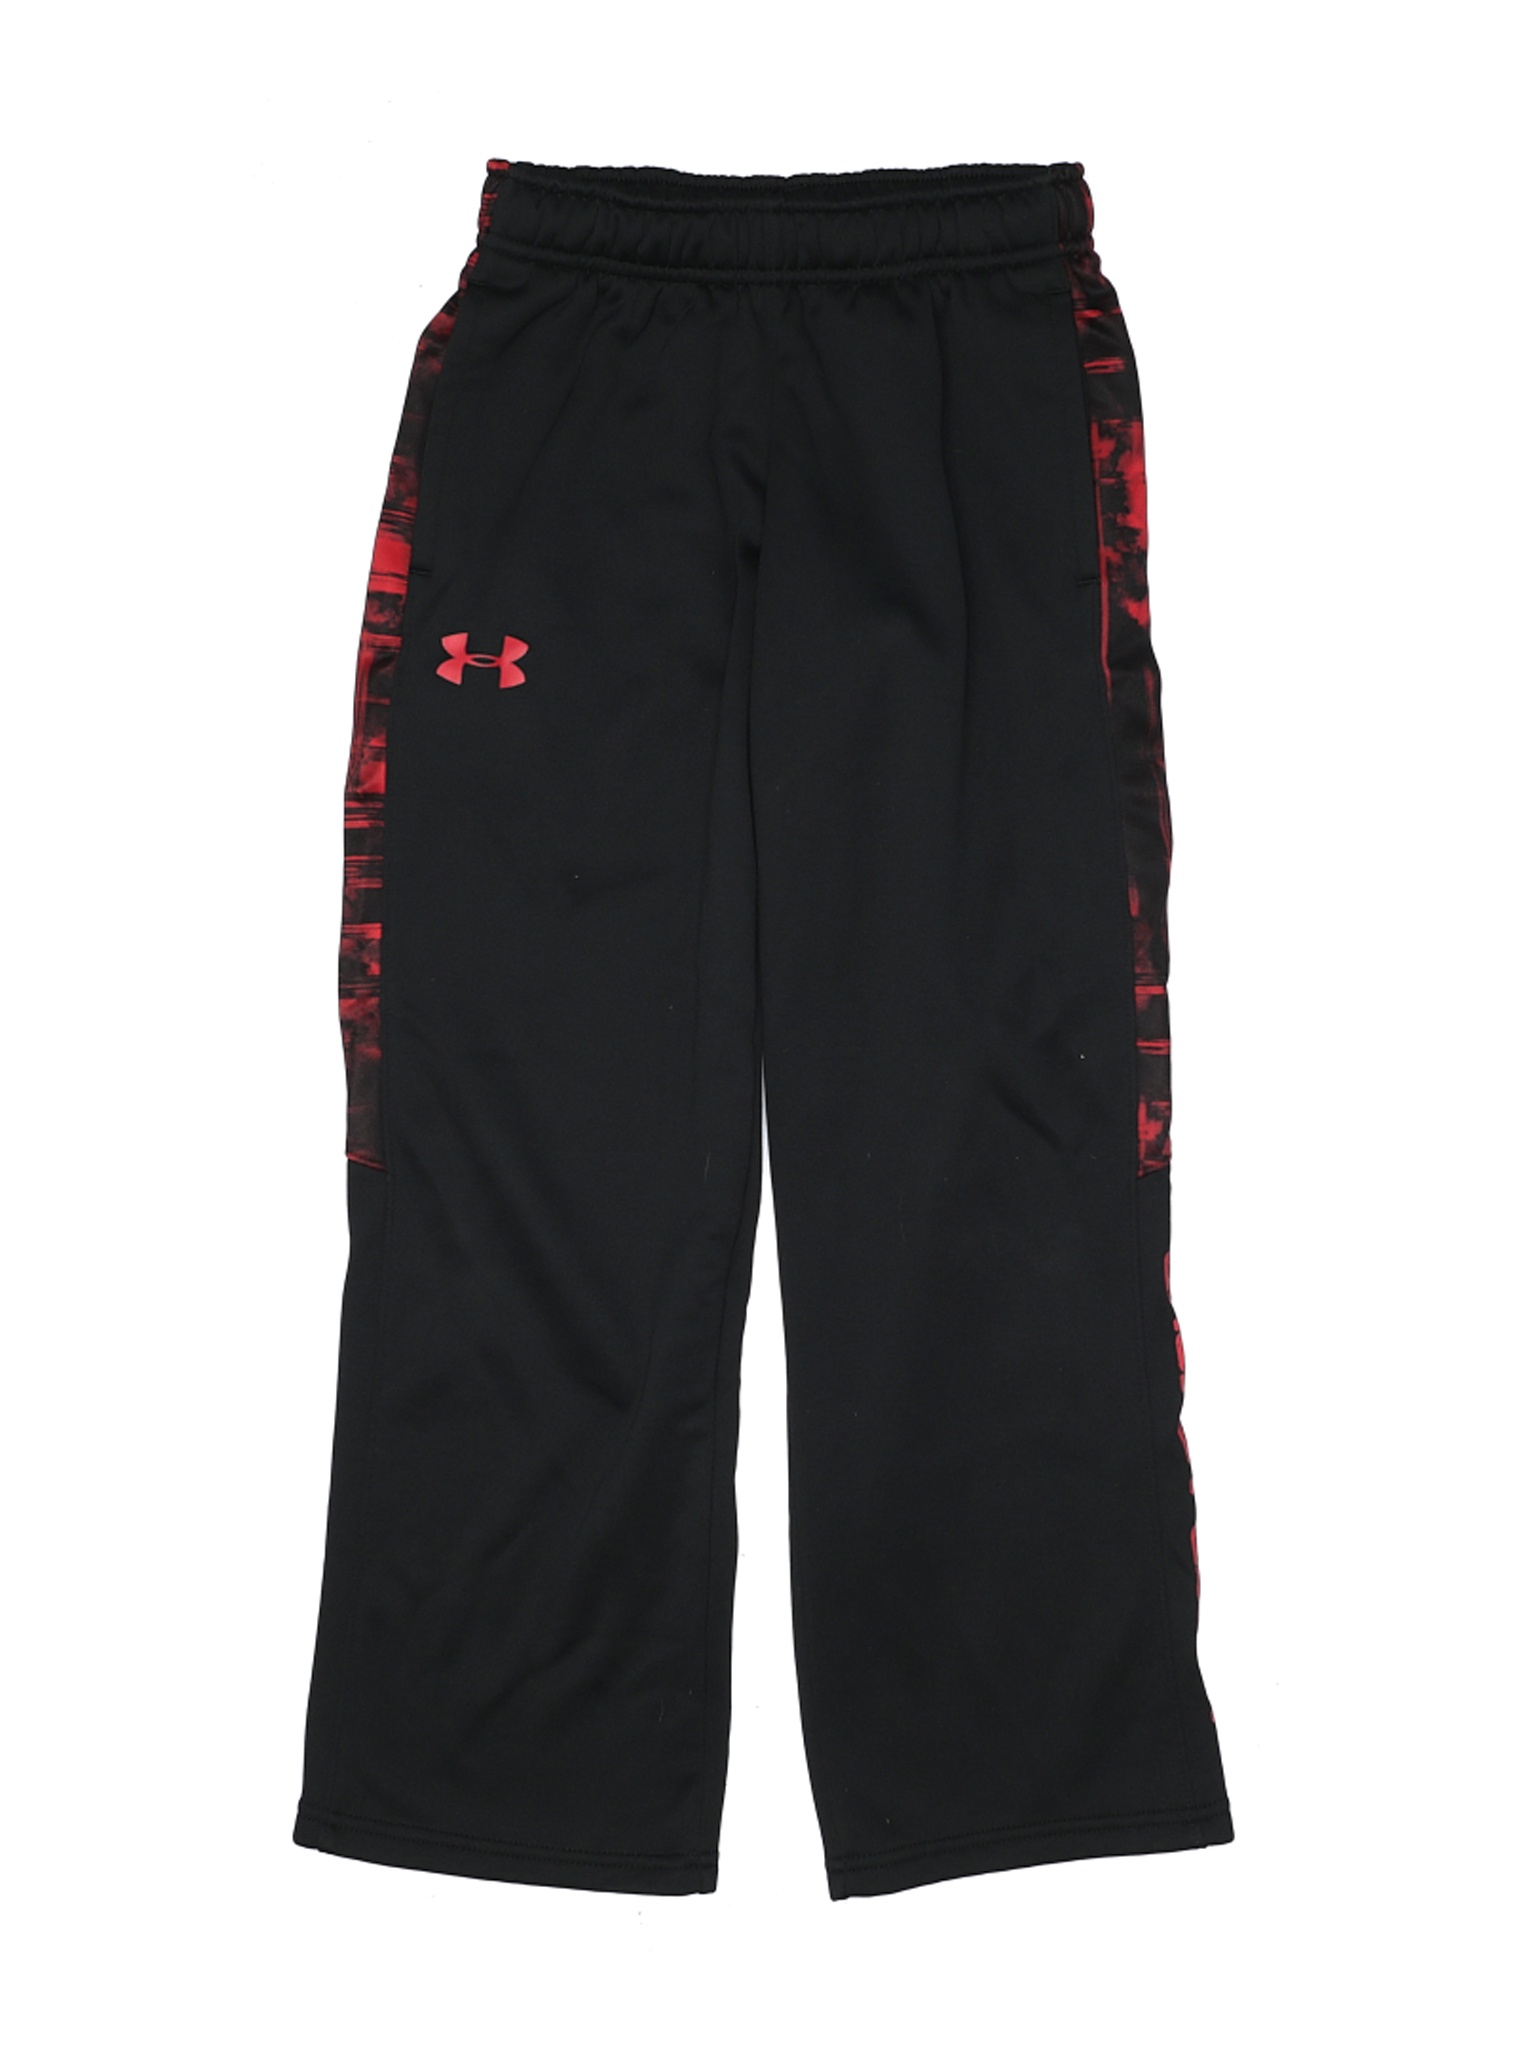 Under Armour Boys Black Active Pants S Youth | eBay